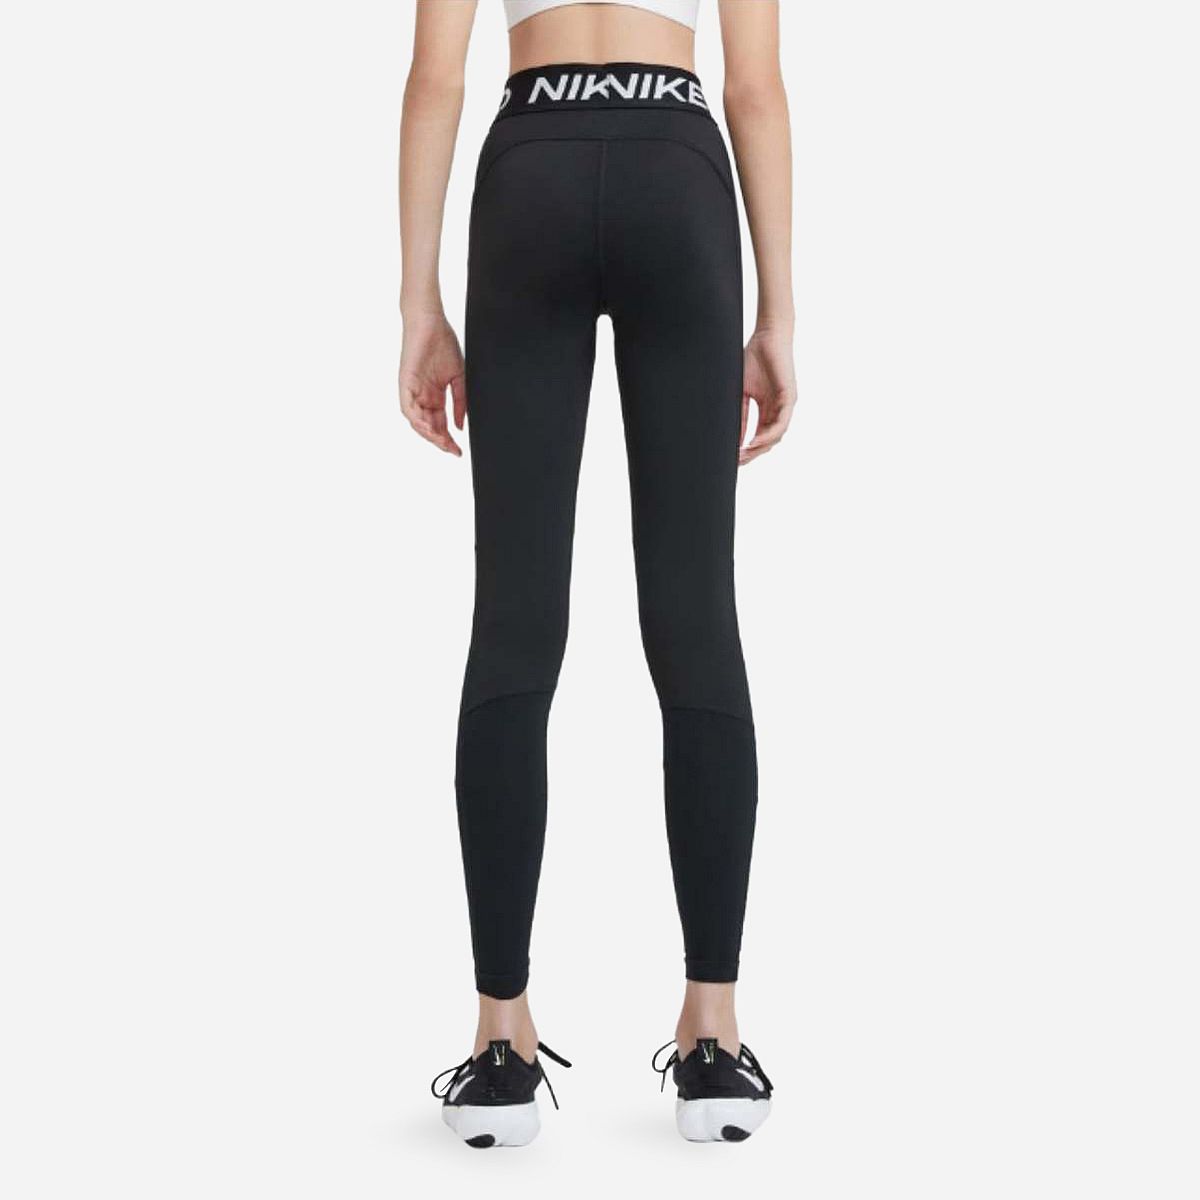 AN265989 Pro Tights Girl